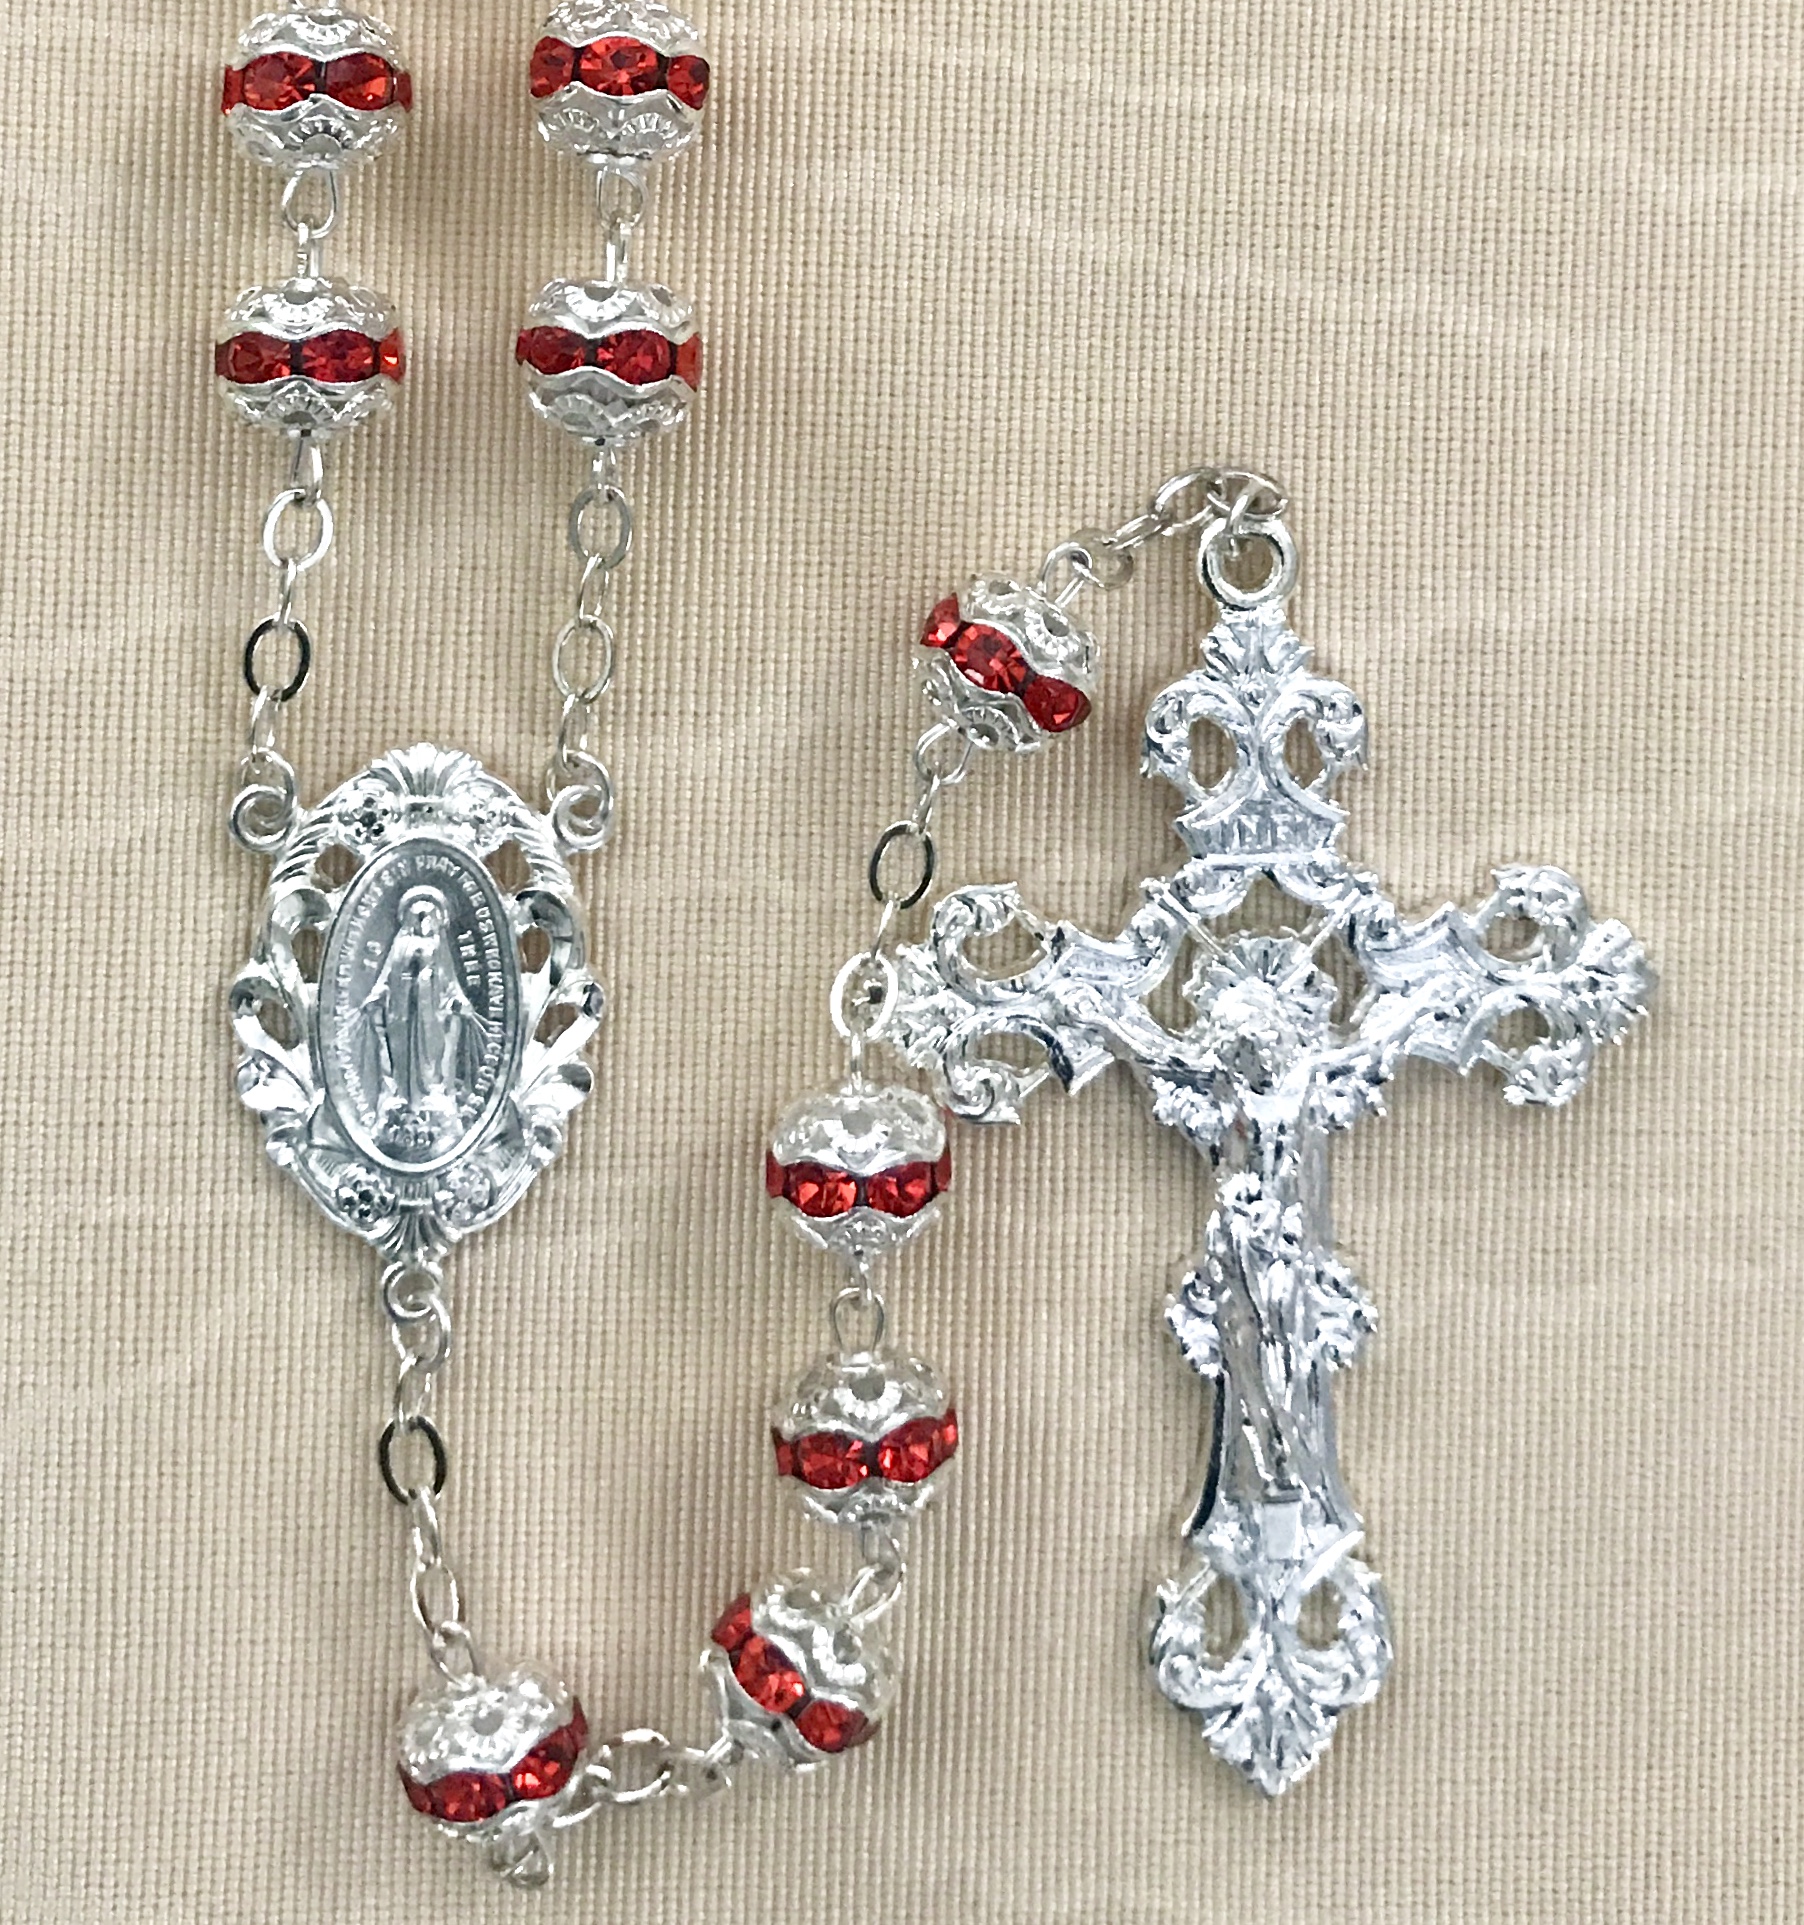 8mm SILVER/RUBY ROSARY WITH STERLING SILVER PLATED CRUCIFIX AND CENTER GIFT BOXED